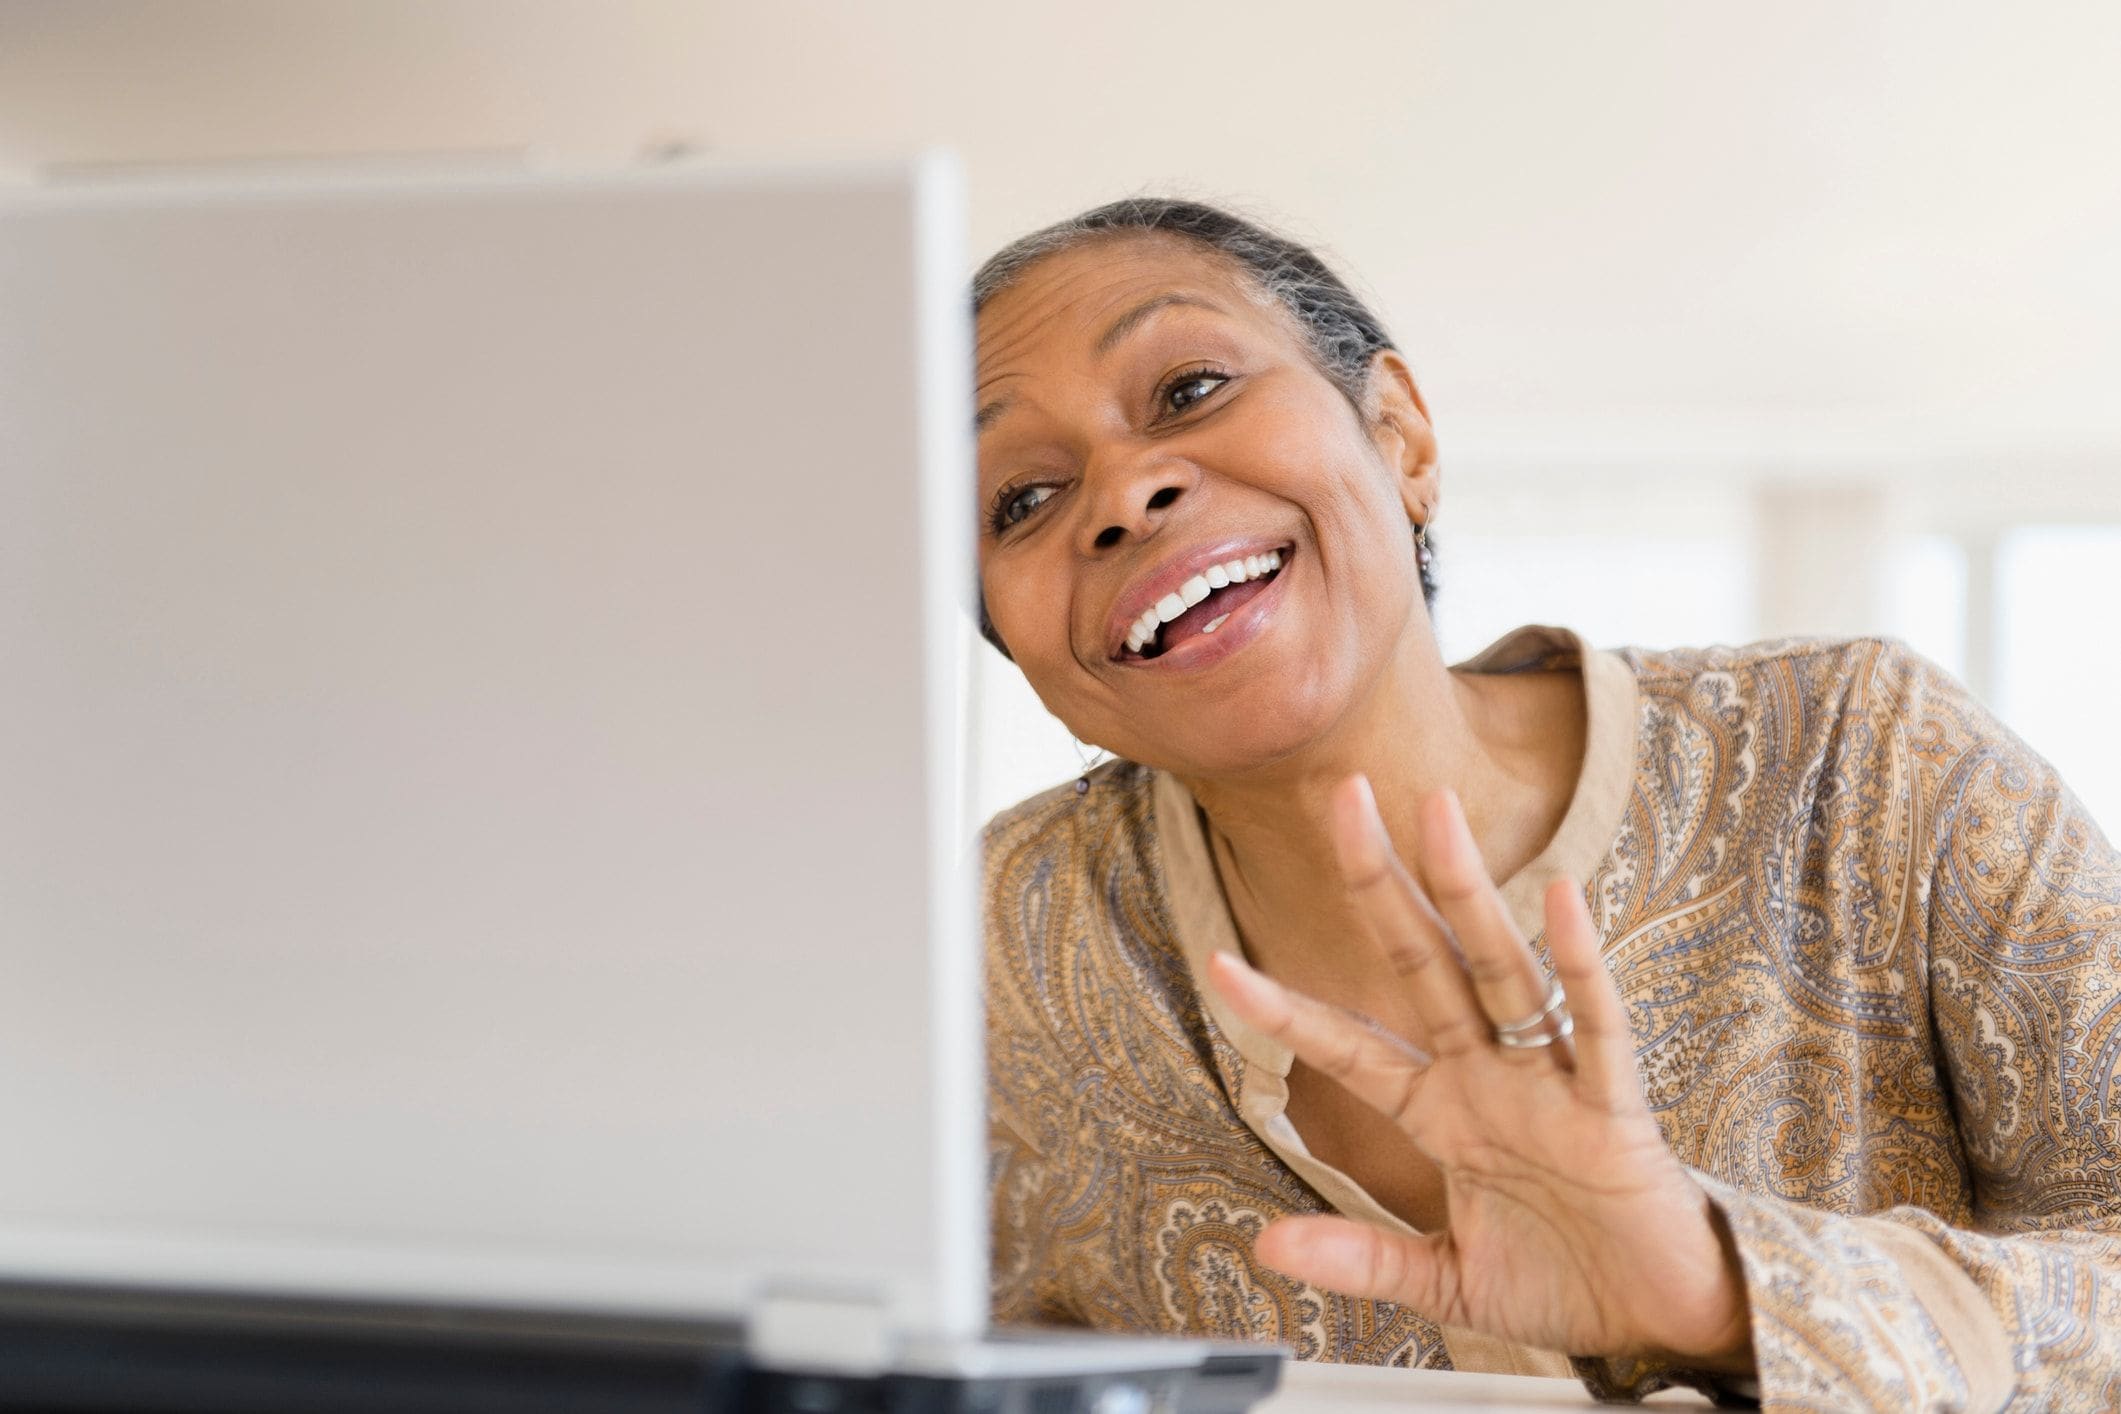 Senior online dating safety: What older adults and caregivers need to know